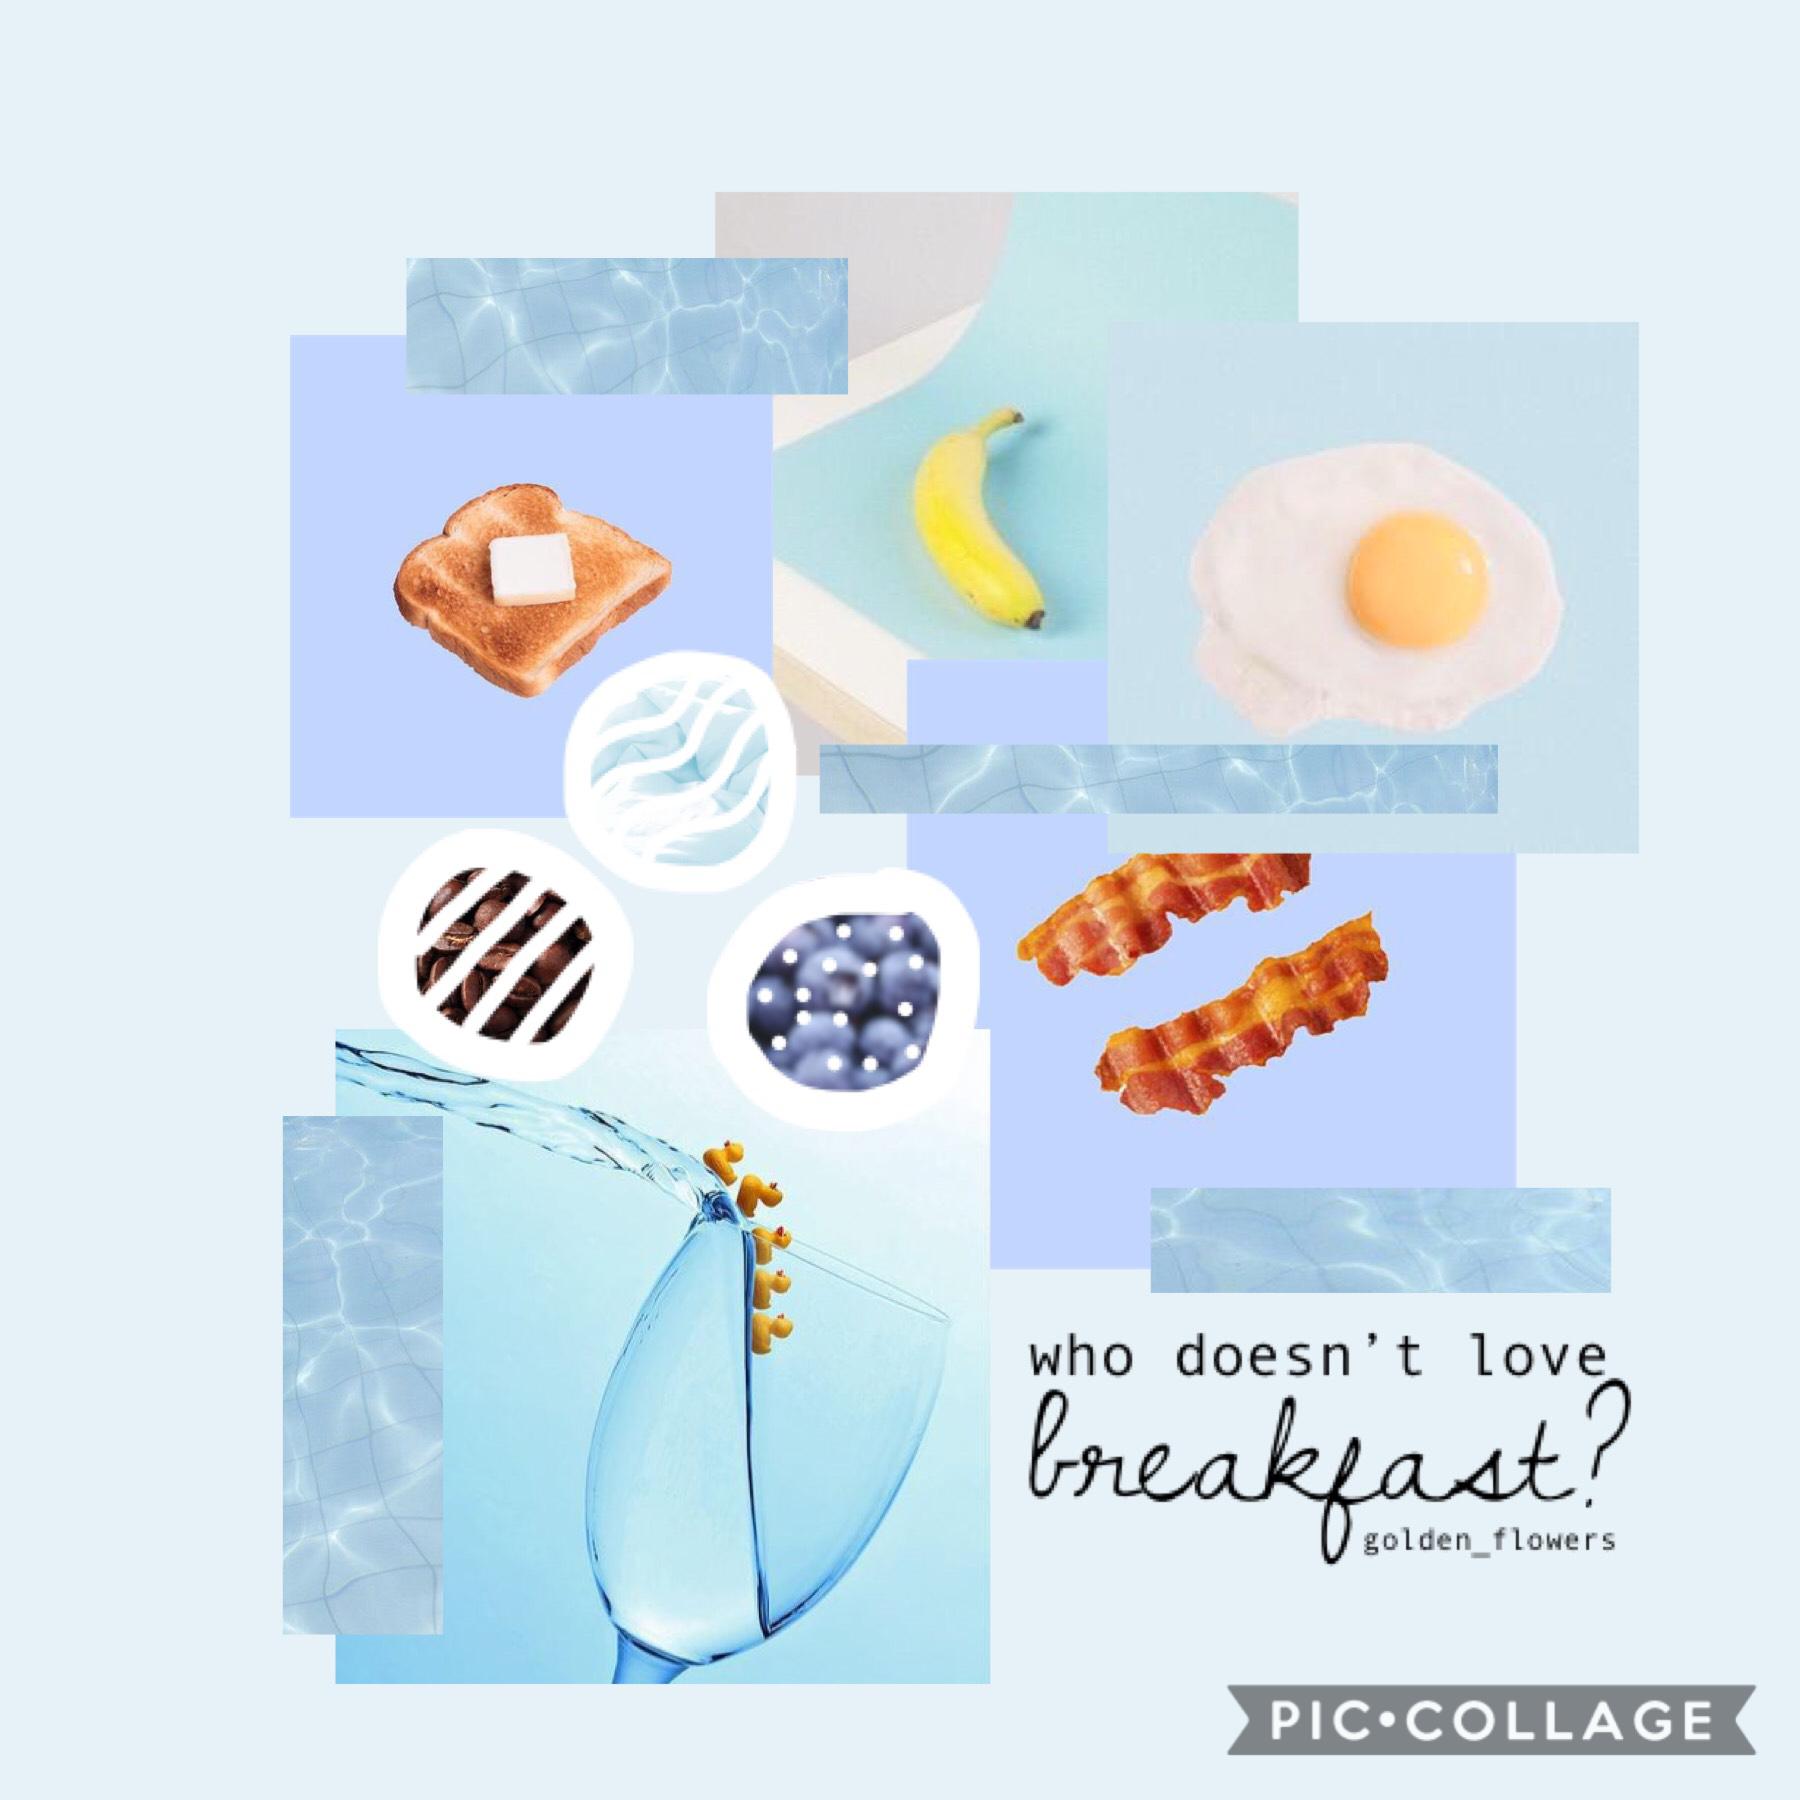 Idk why I made this(tap)

Dinner is still the best c:

It’s been a hot second since I’ve done this but...

QOTD:What is your favorite breakfast food?
AOTD:pancakes and donuts